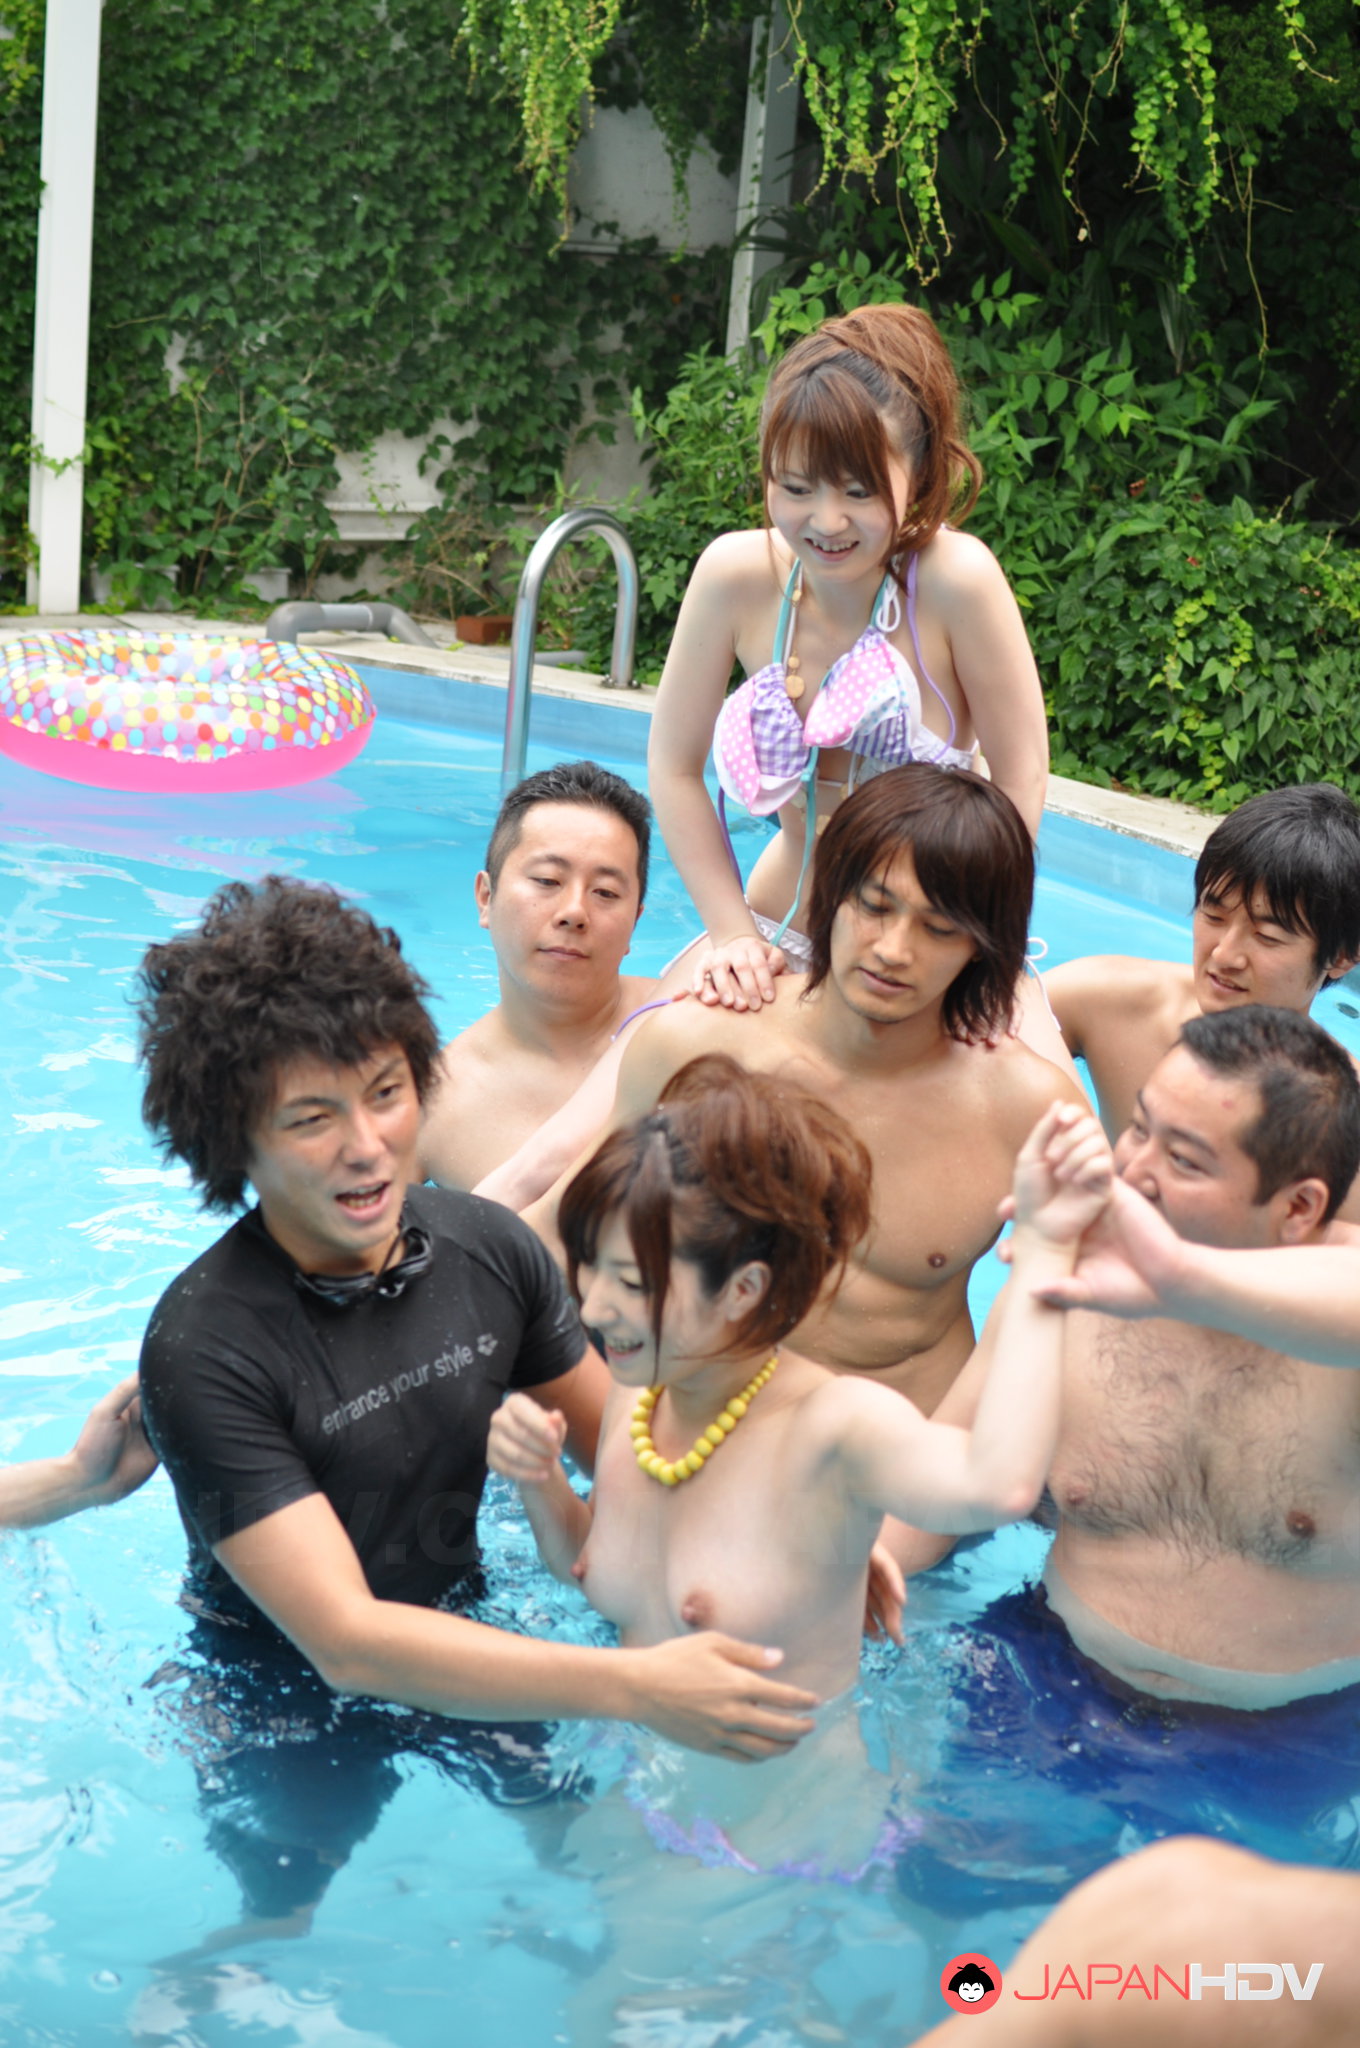 Amateur Teen Pool Party - Japanese girls enjoy in some sexy pool party